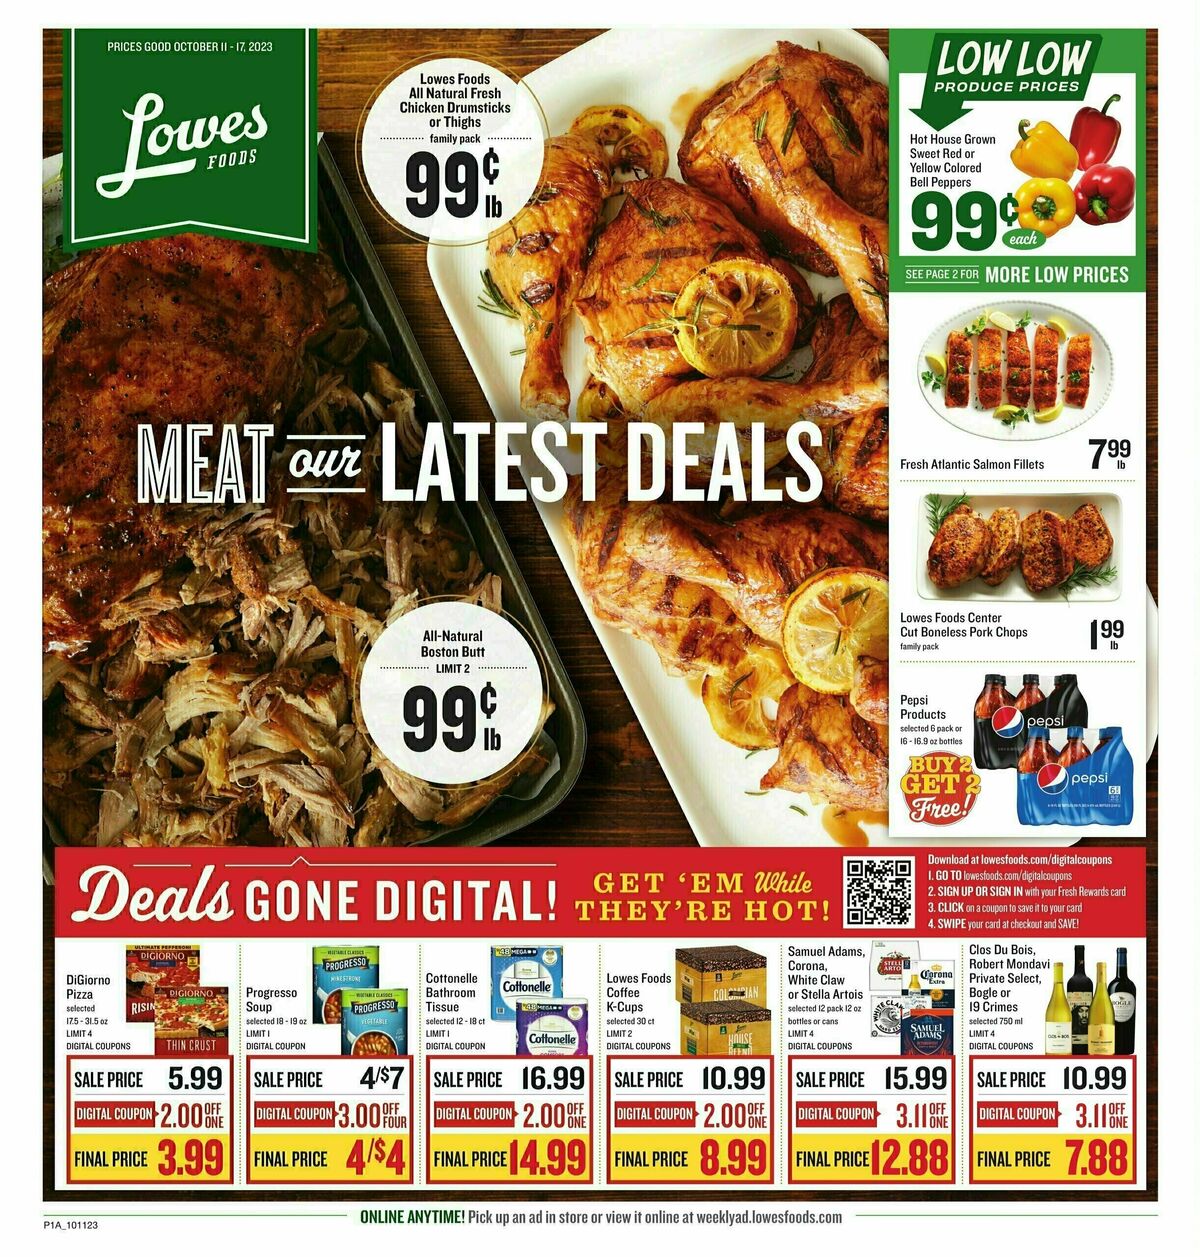 Lowes Foods Weekly Ad from October 11